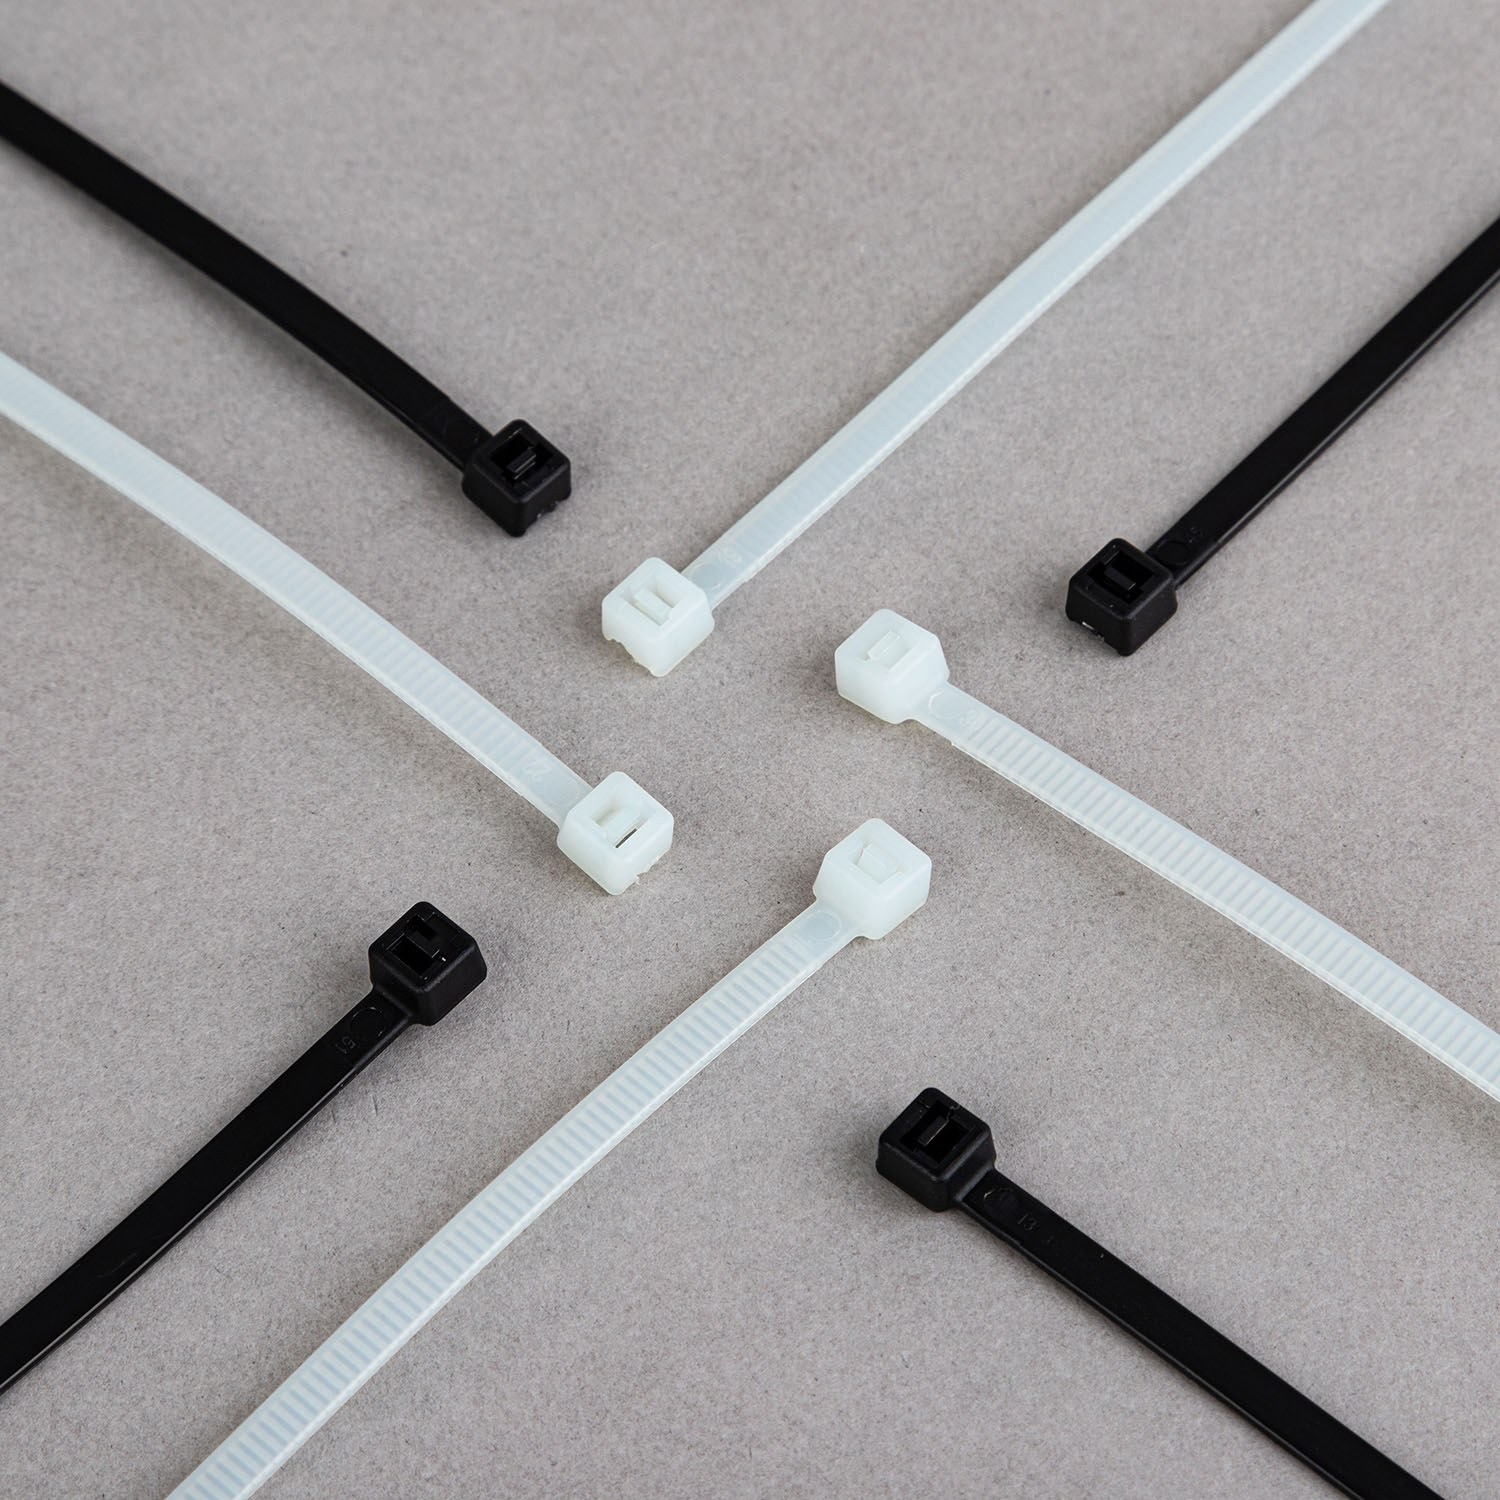 Shiyun cable tie Special Cable tie cable tie Low temperature and cold resistant self-locking nylon cable tie